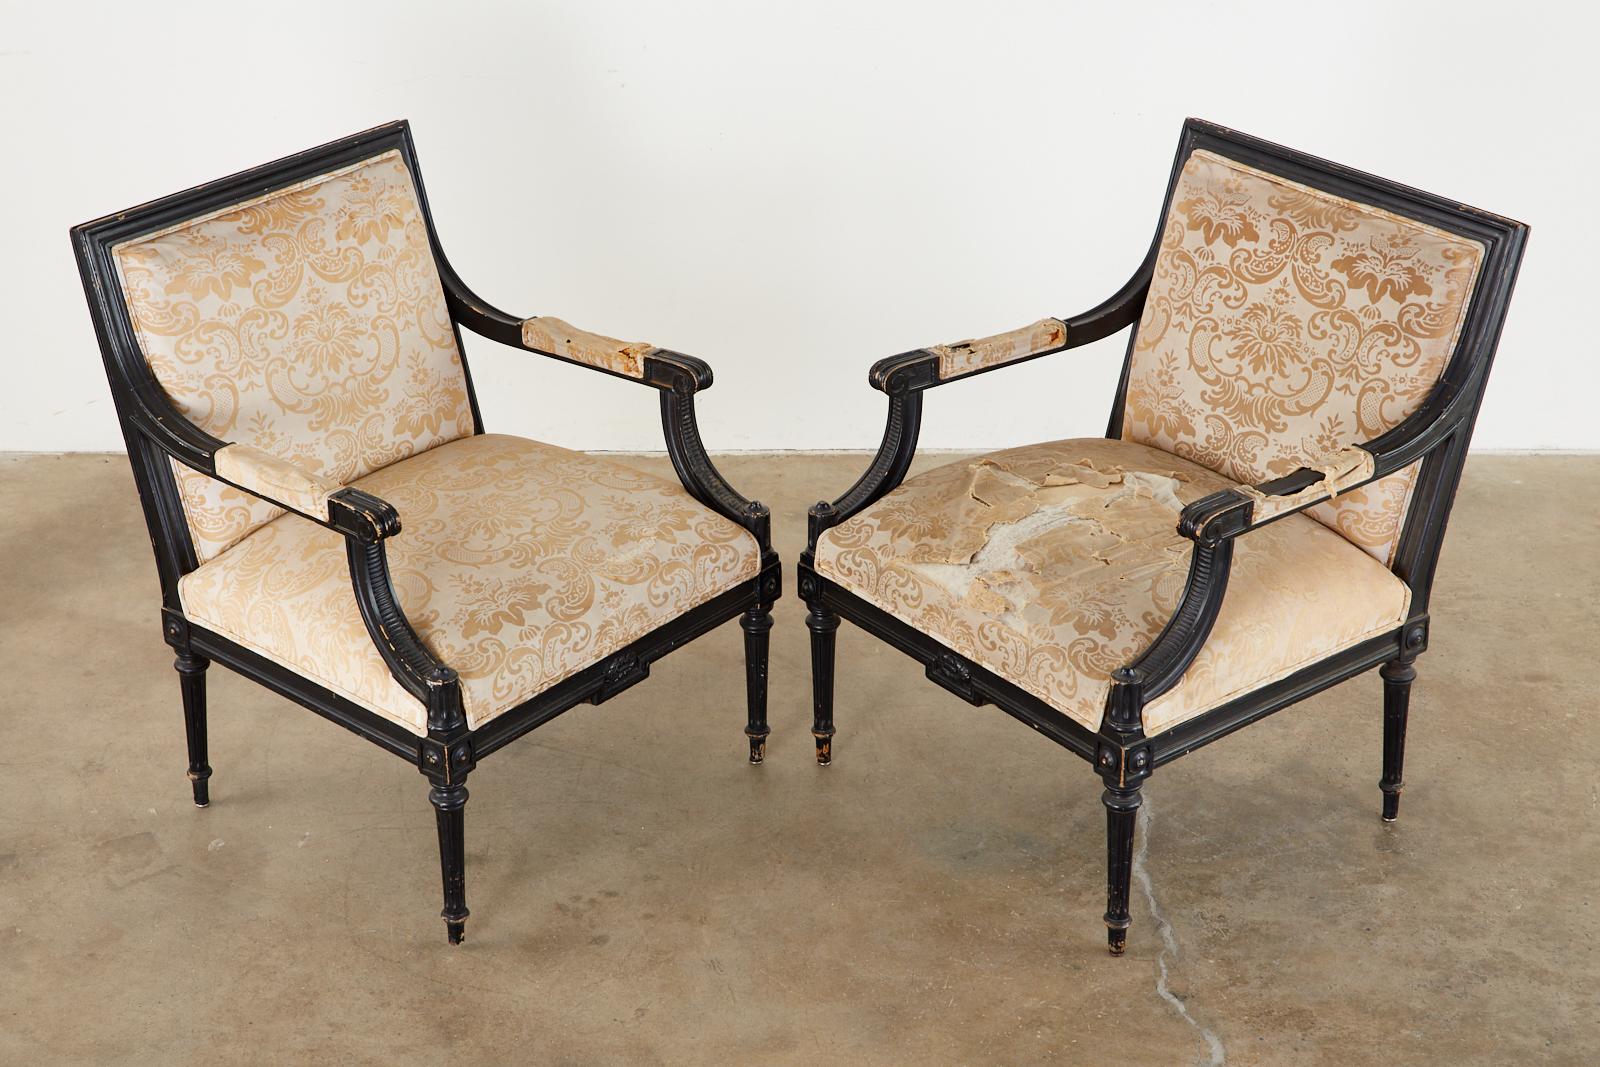 20th Century Pair of French Maison Jansen Style Fauteuil Armchairs